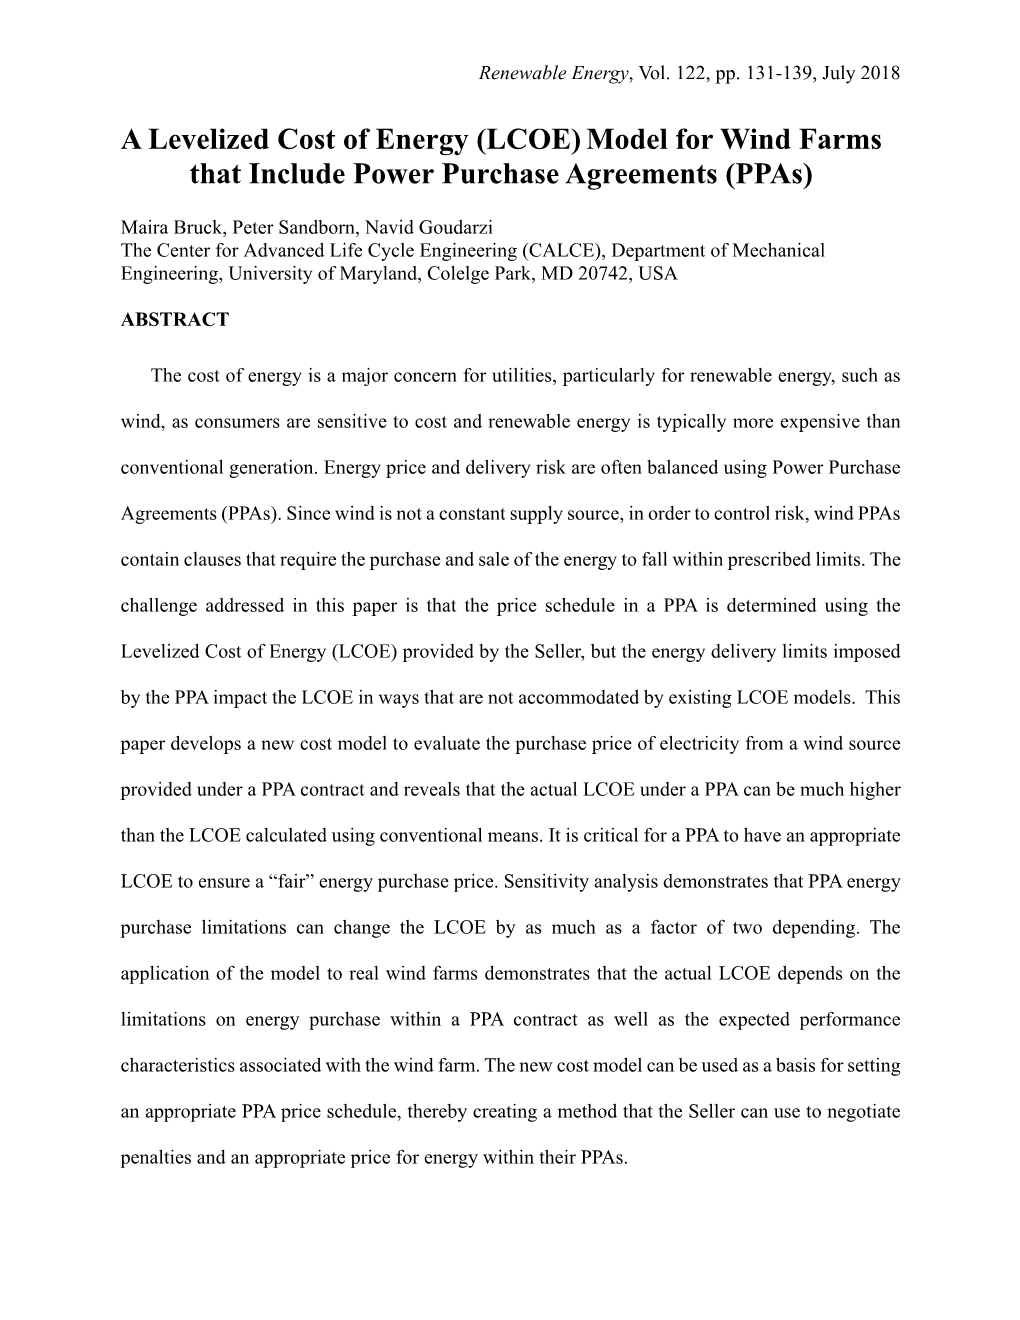 (LCOE)Model for Wind Farms That Include Power Purchase Agreements